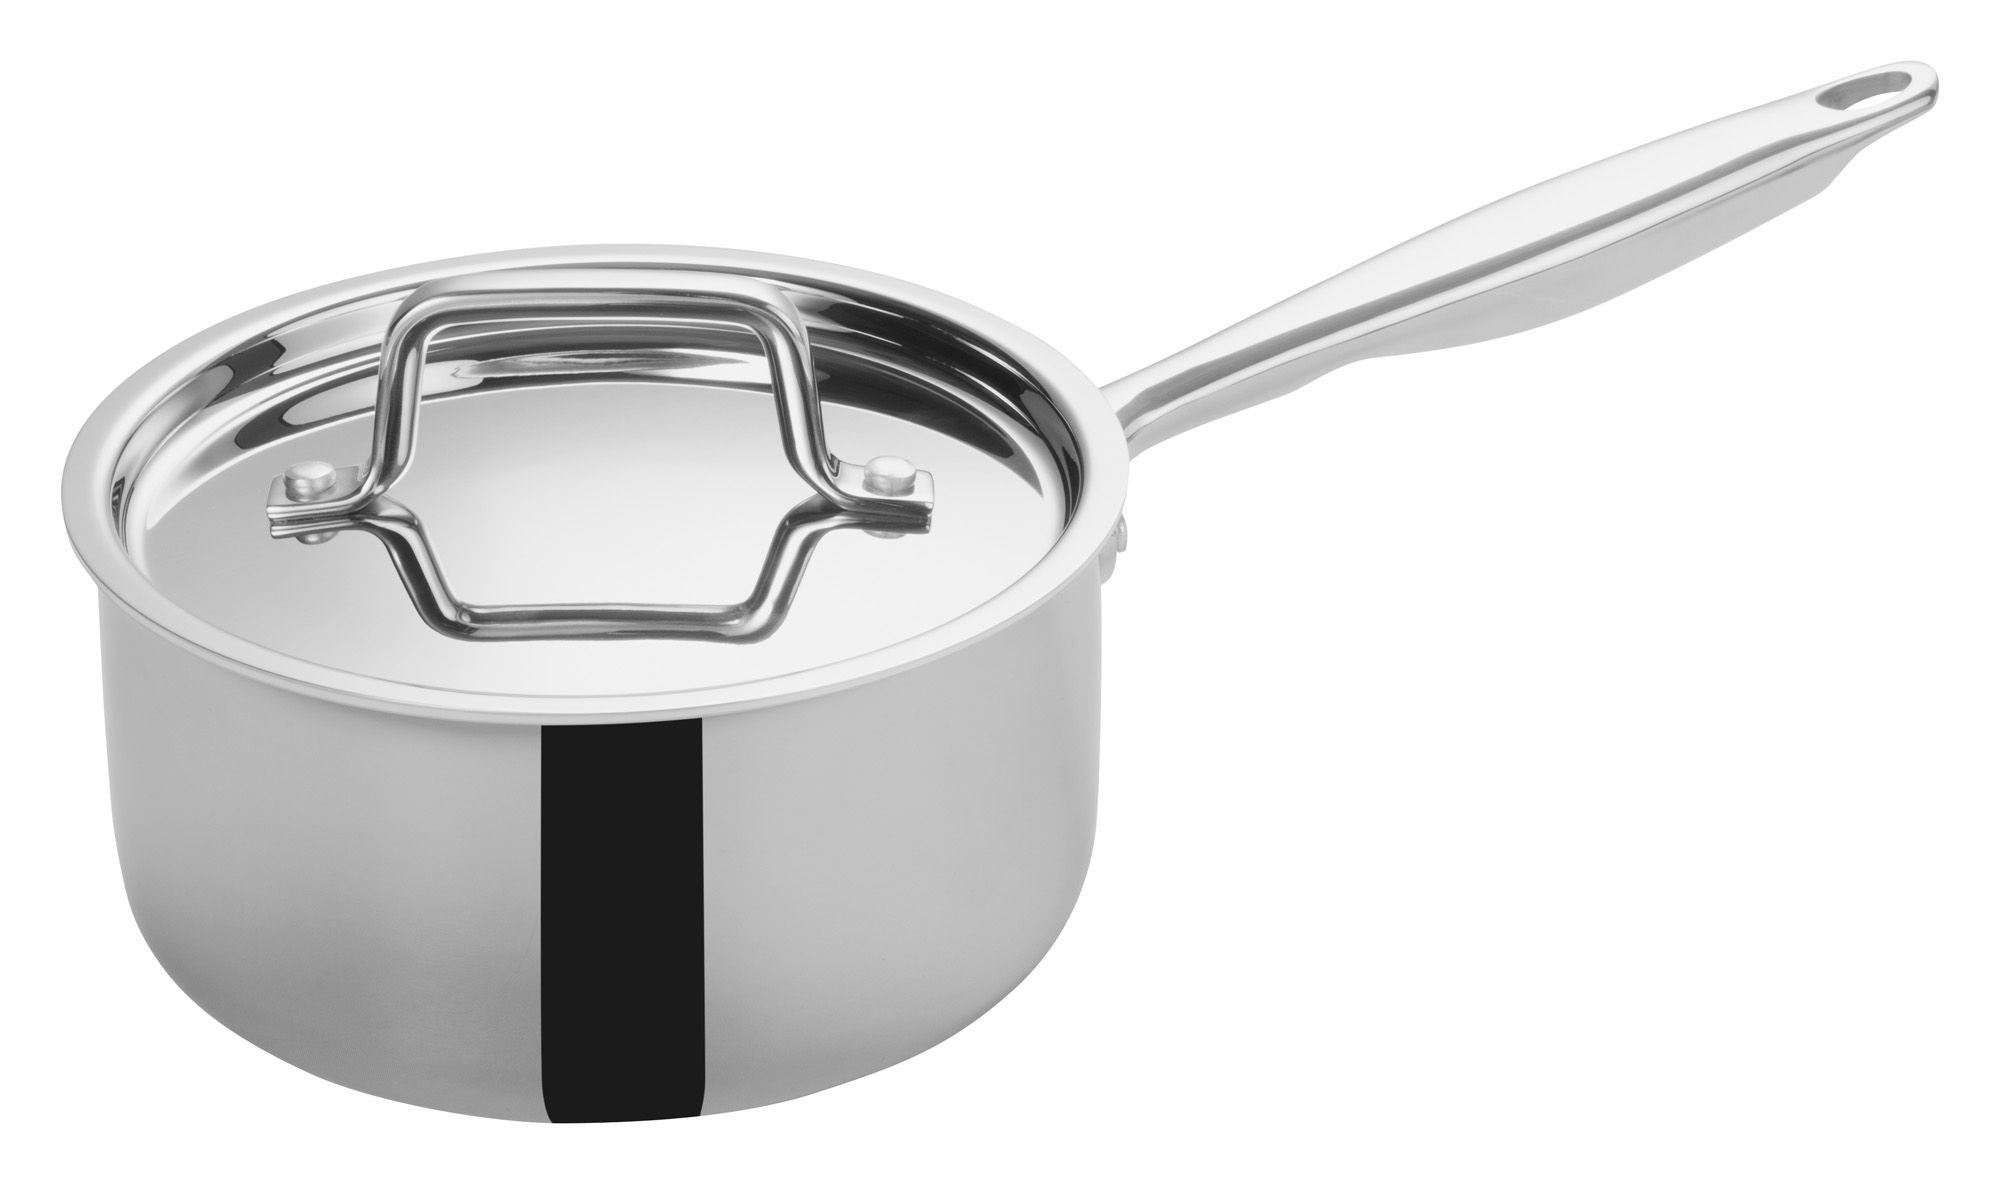 Winco TGAP-3 Tri-Ply Stainless Steel 2.5 Qt. Sauce Pan with Cover